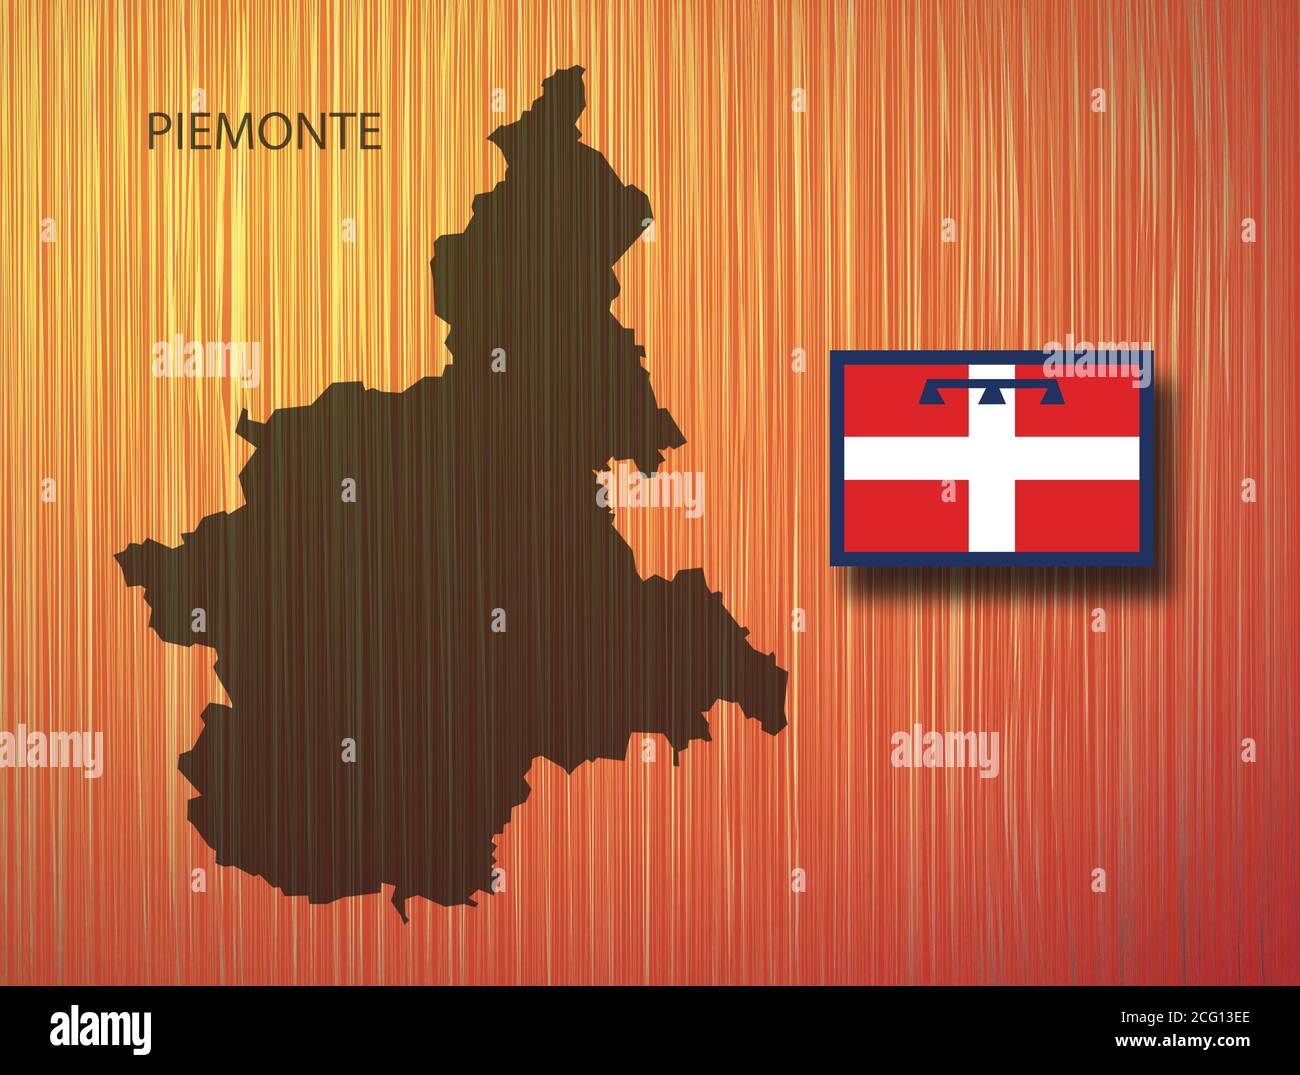 Map and flag of Piedmont (Piemonte), region of Italy, on a wooden background, 3D illustration Stock Photo